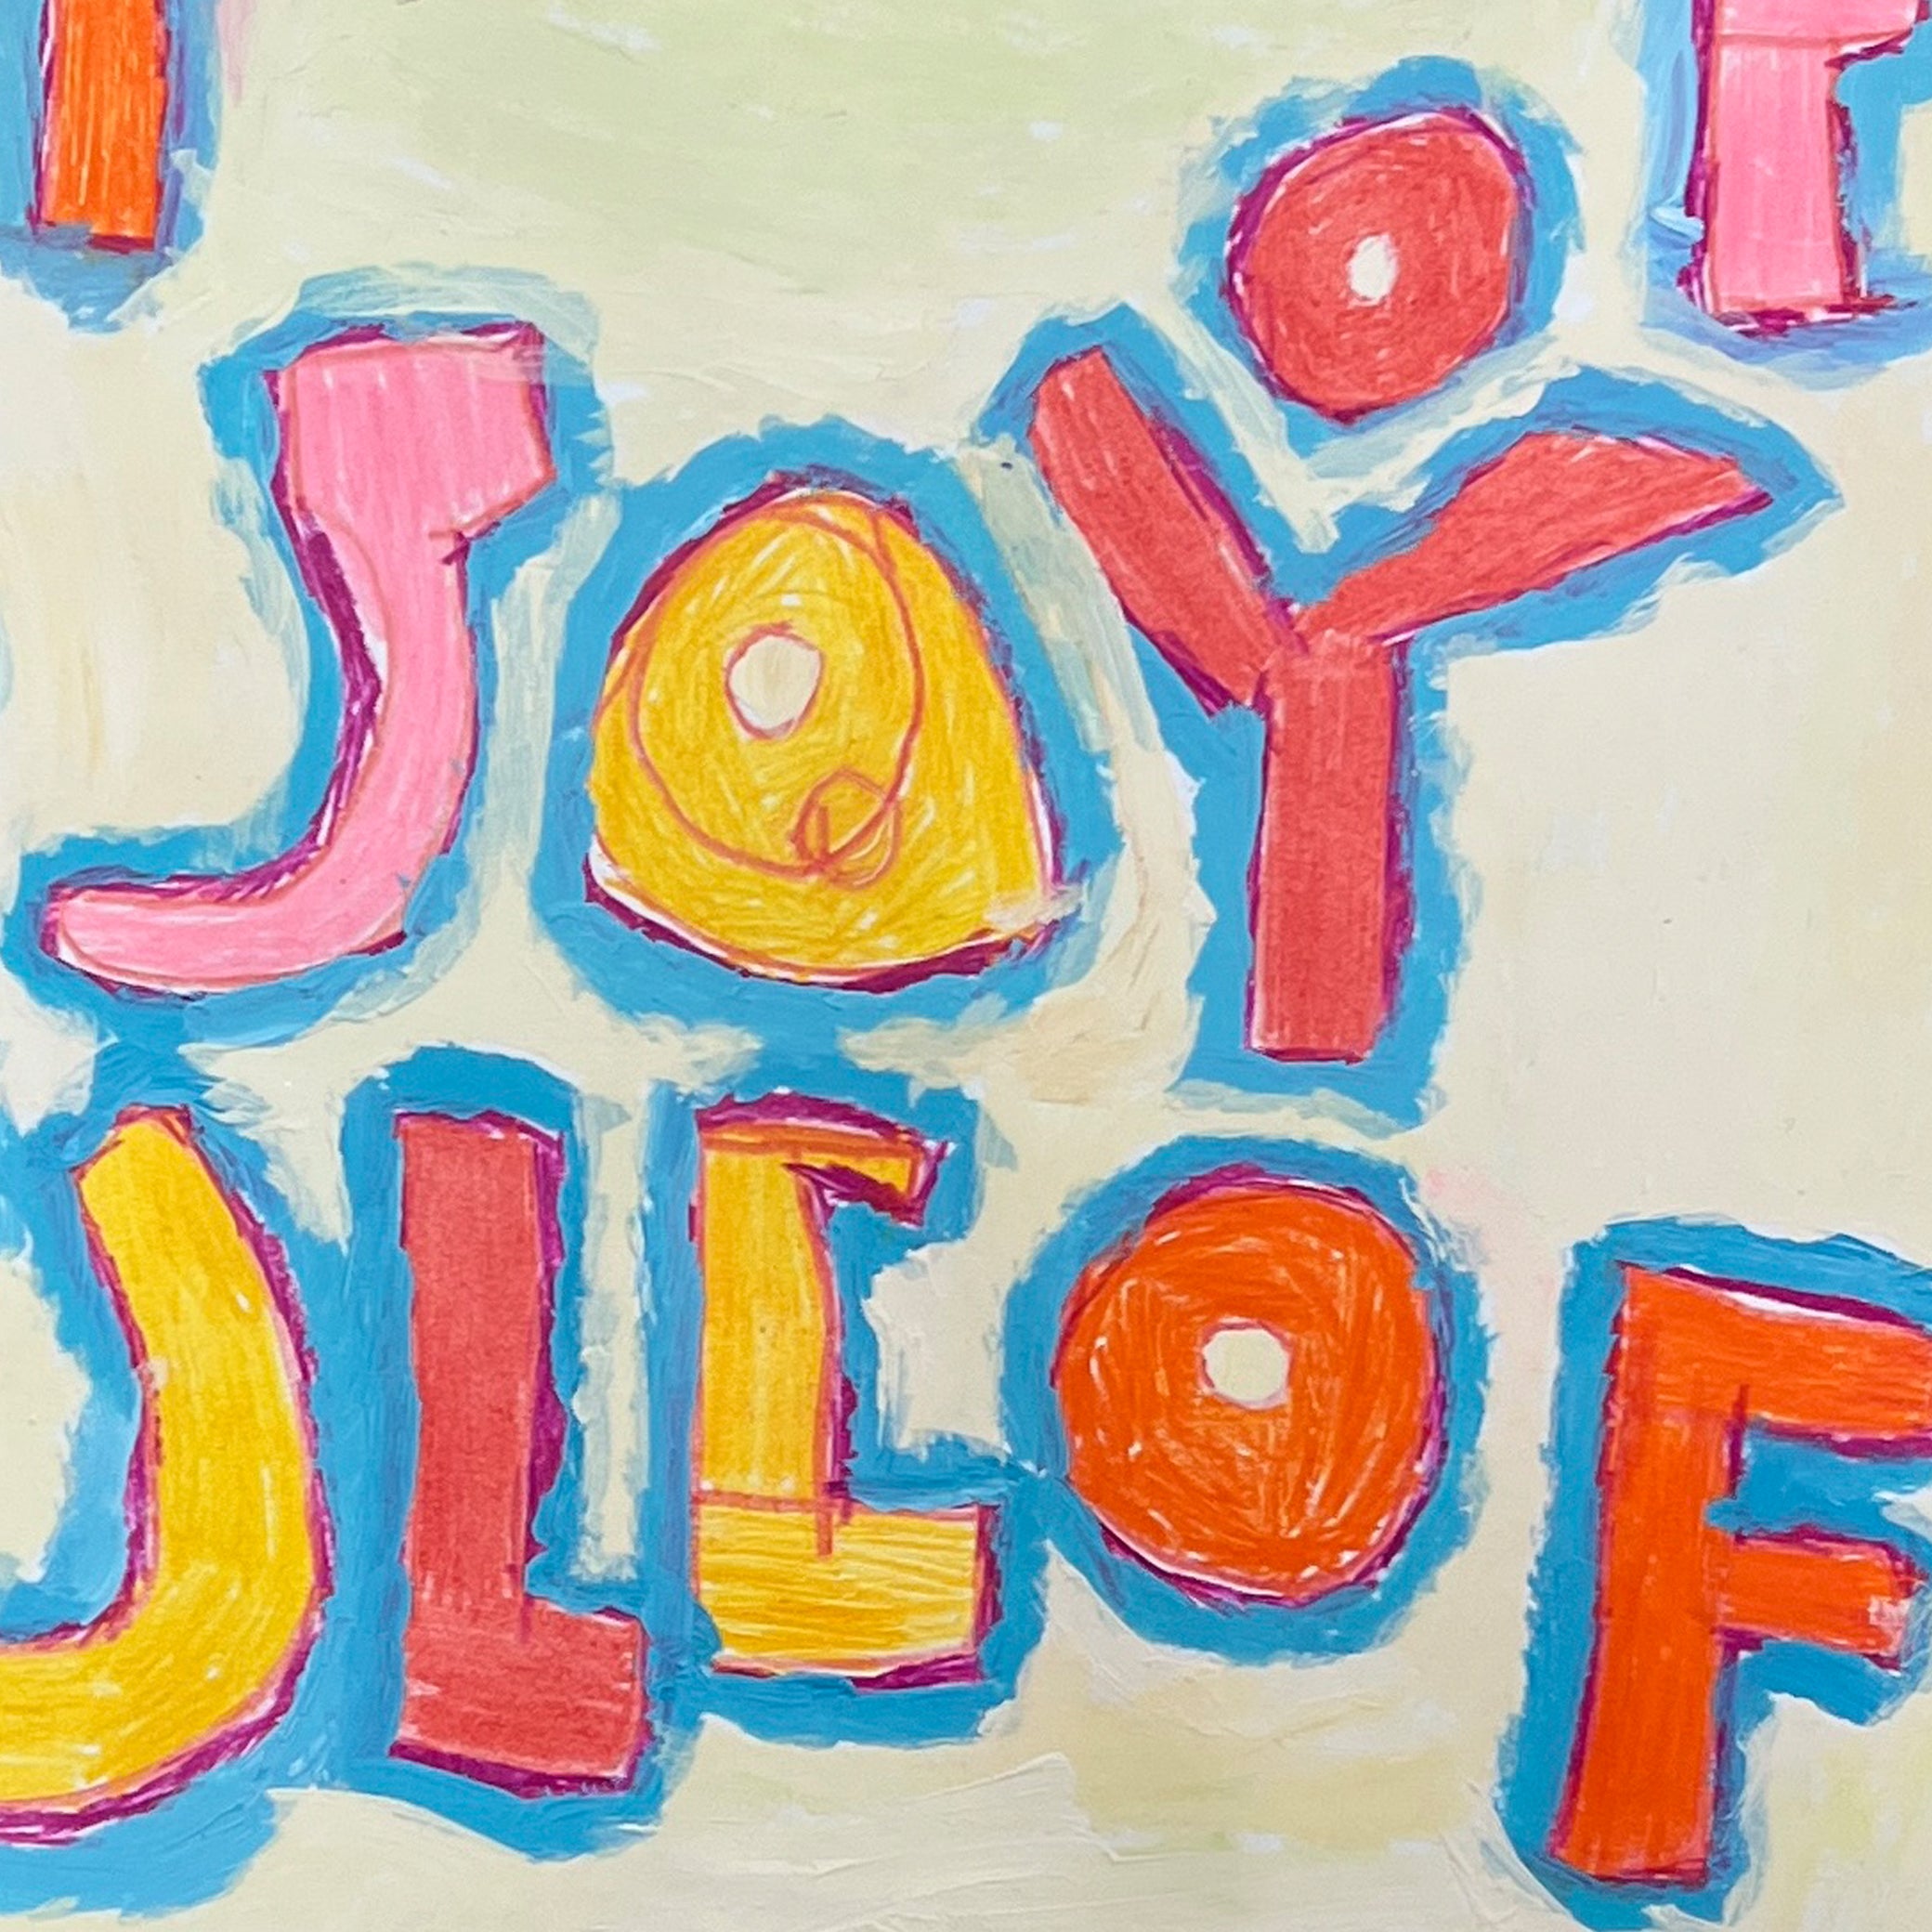 Close up on 'I am Joy Painting' in blues, reds and yellows